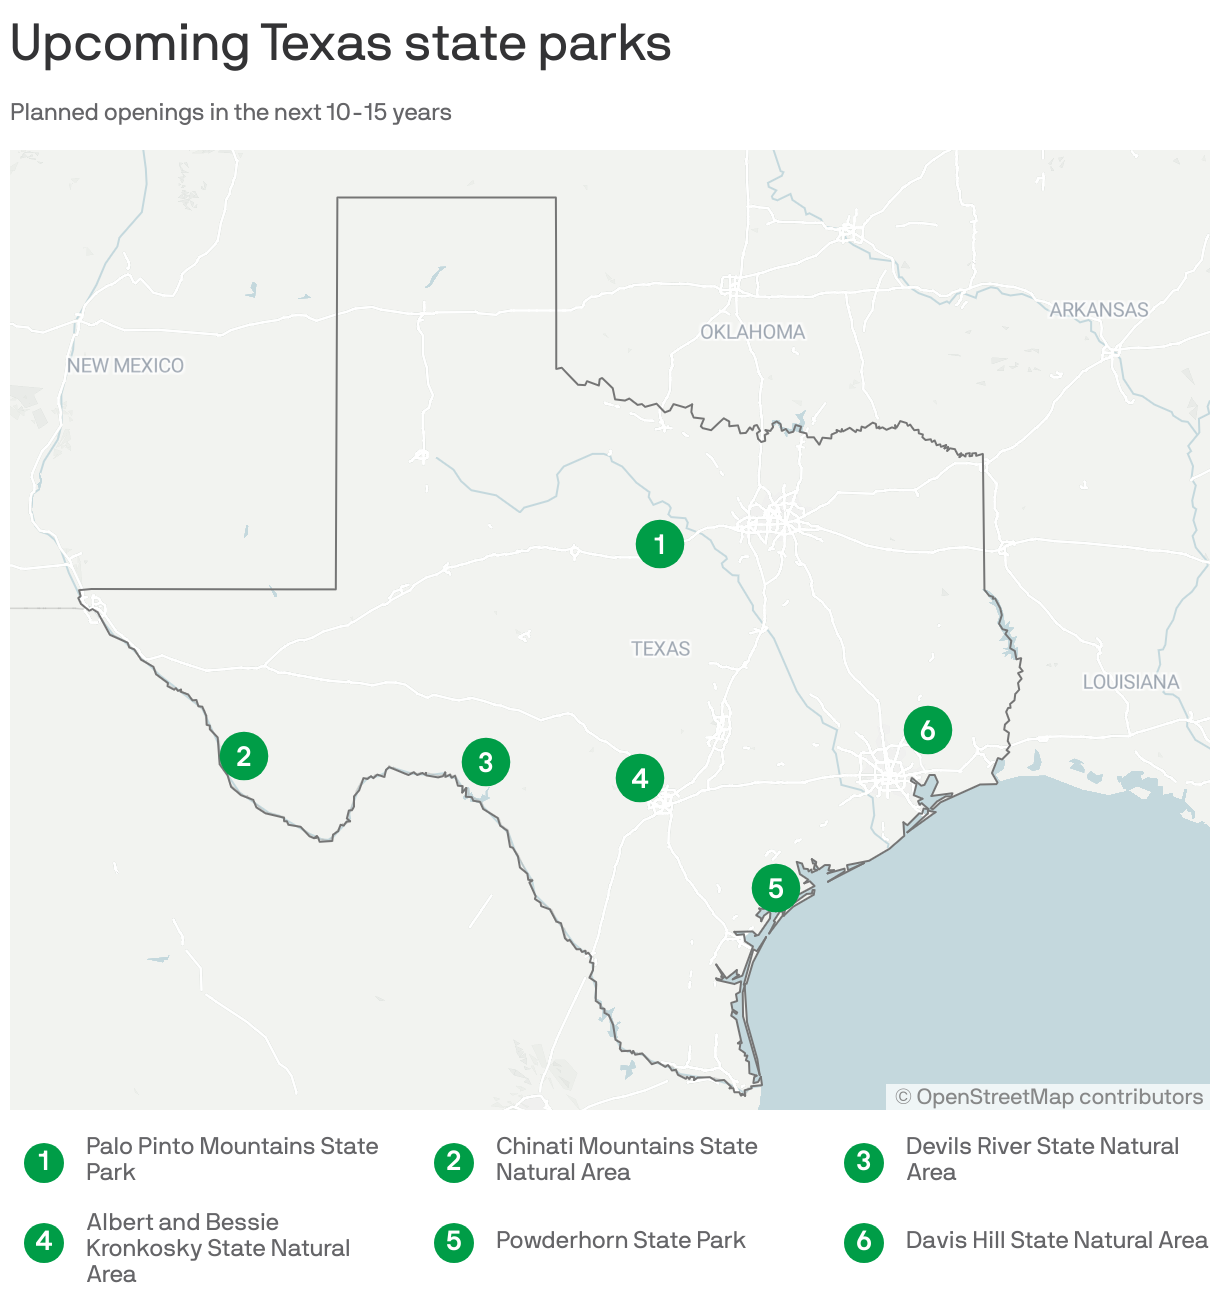 Upcoming Texas state parks